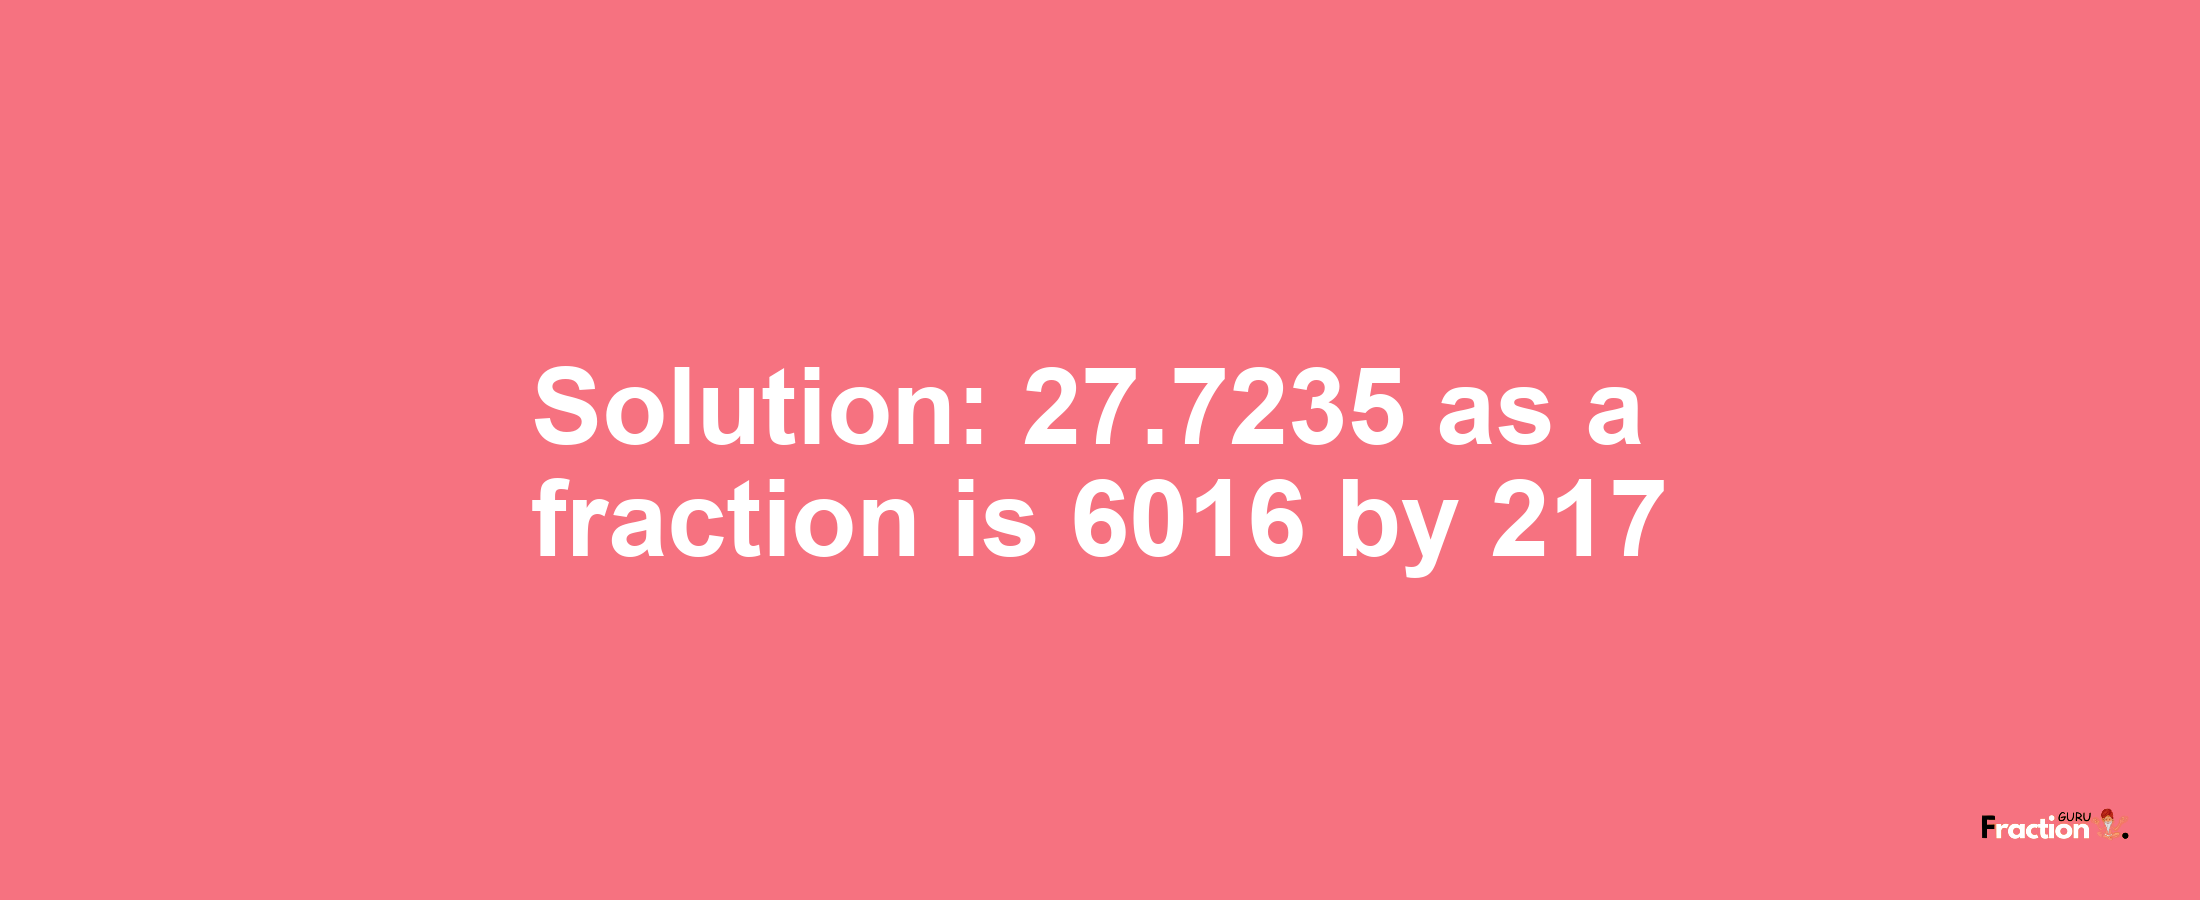 Solution:27.7235 as a fraction is 6016/217